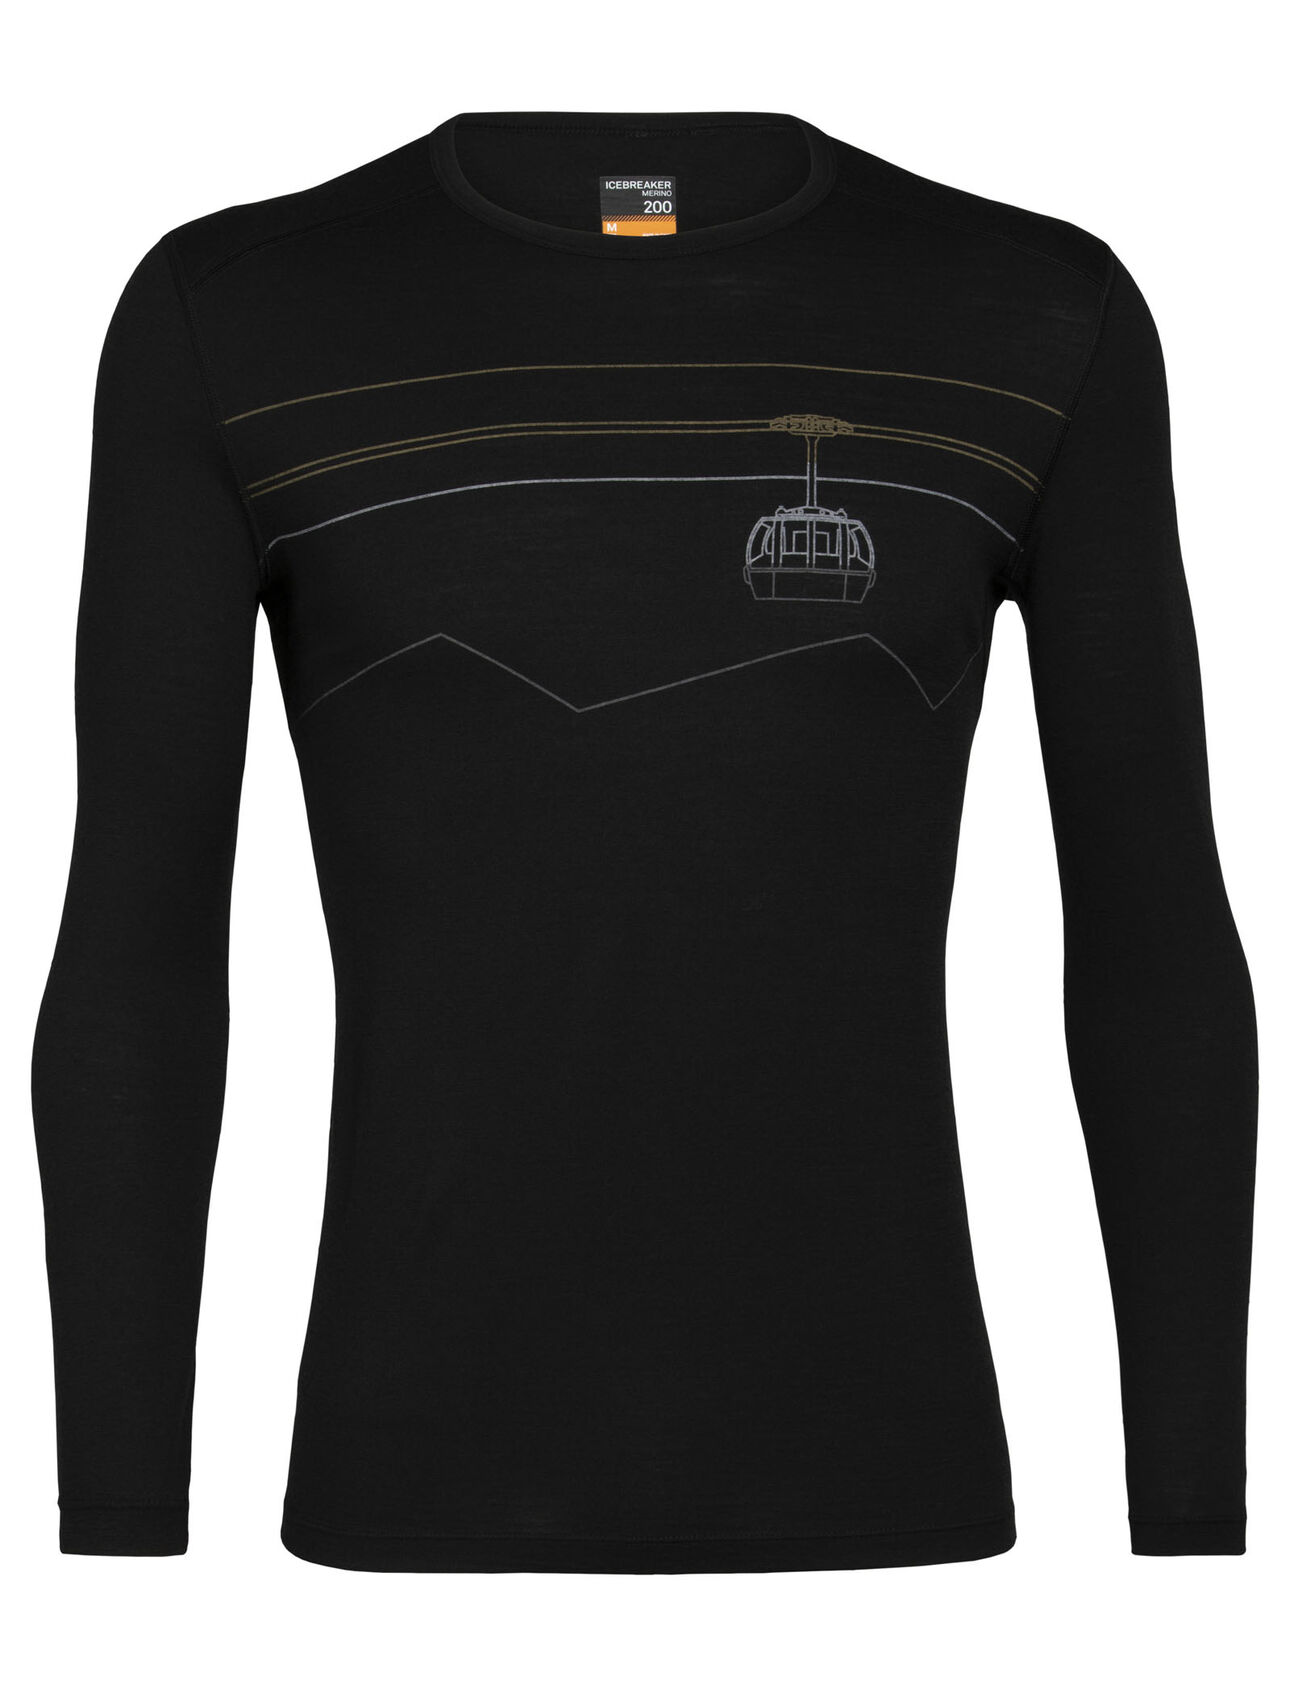 Mens Merino 200 Oasis Long Sleeve Crewe Thermal Top Peak to Peak Lift Our versatile, go-anywhere shirt made from breathable 100% merino wool jersey, the 200 Oasis Long Sleeve Crewe Peak to Peak Lift is our best-selling base layer top.